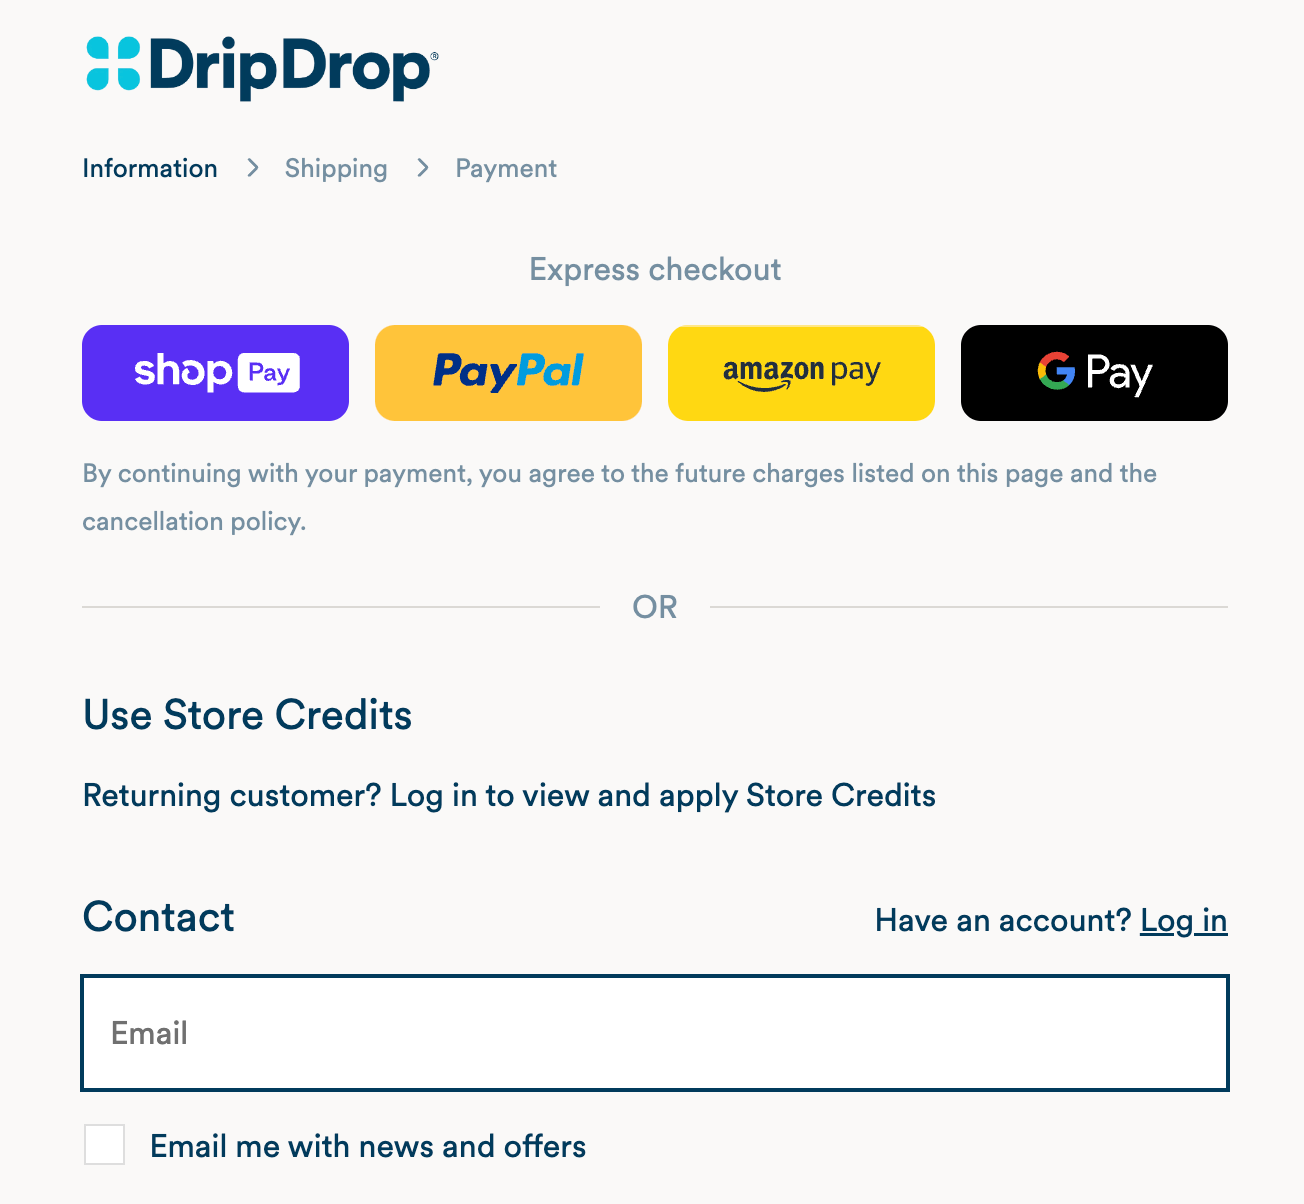  A screenshot of the checkout page on DripDrop, displaying express checkout options like Shop Pay from Shopify.